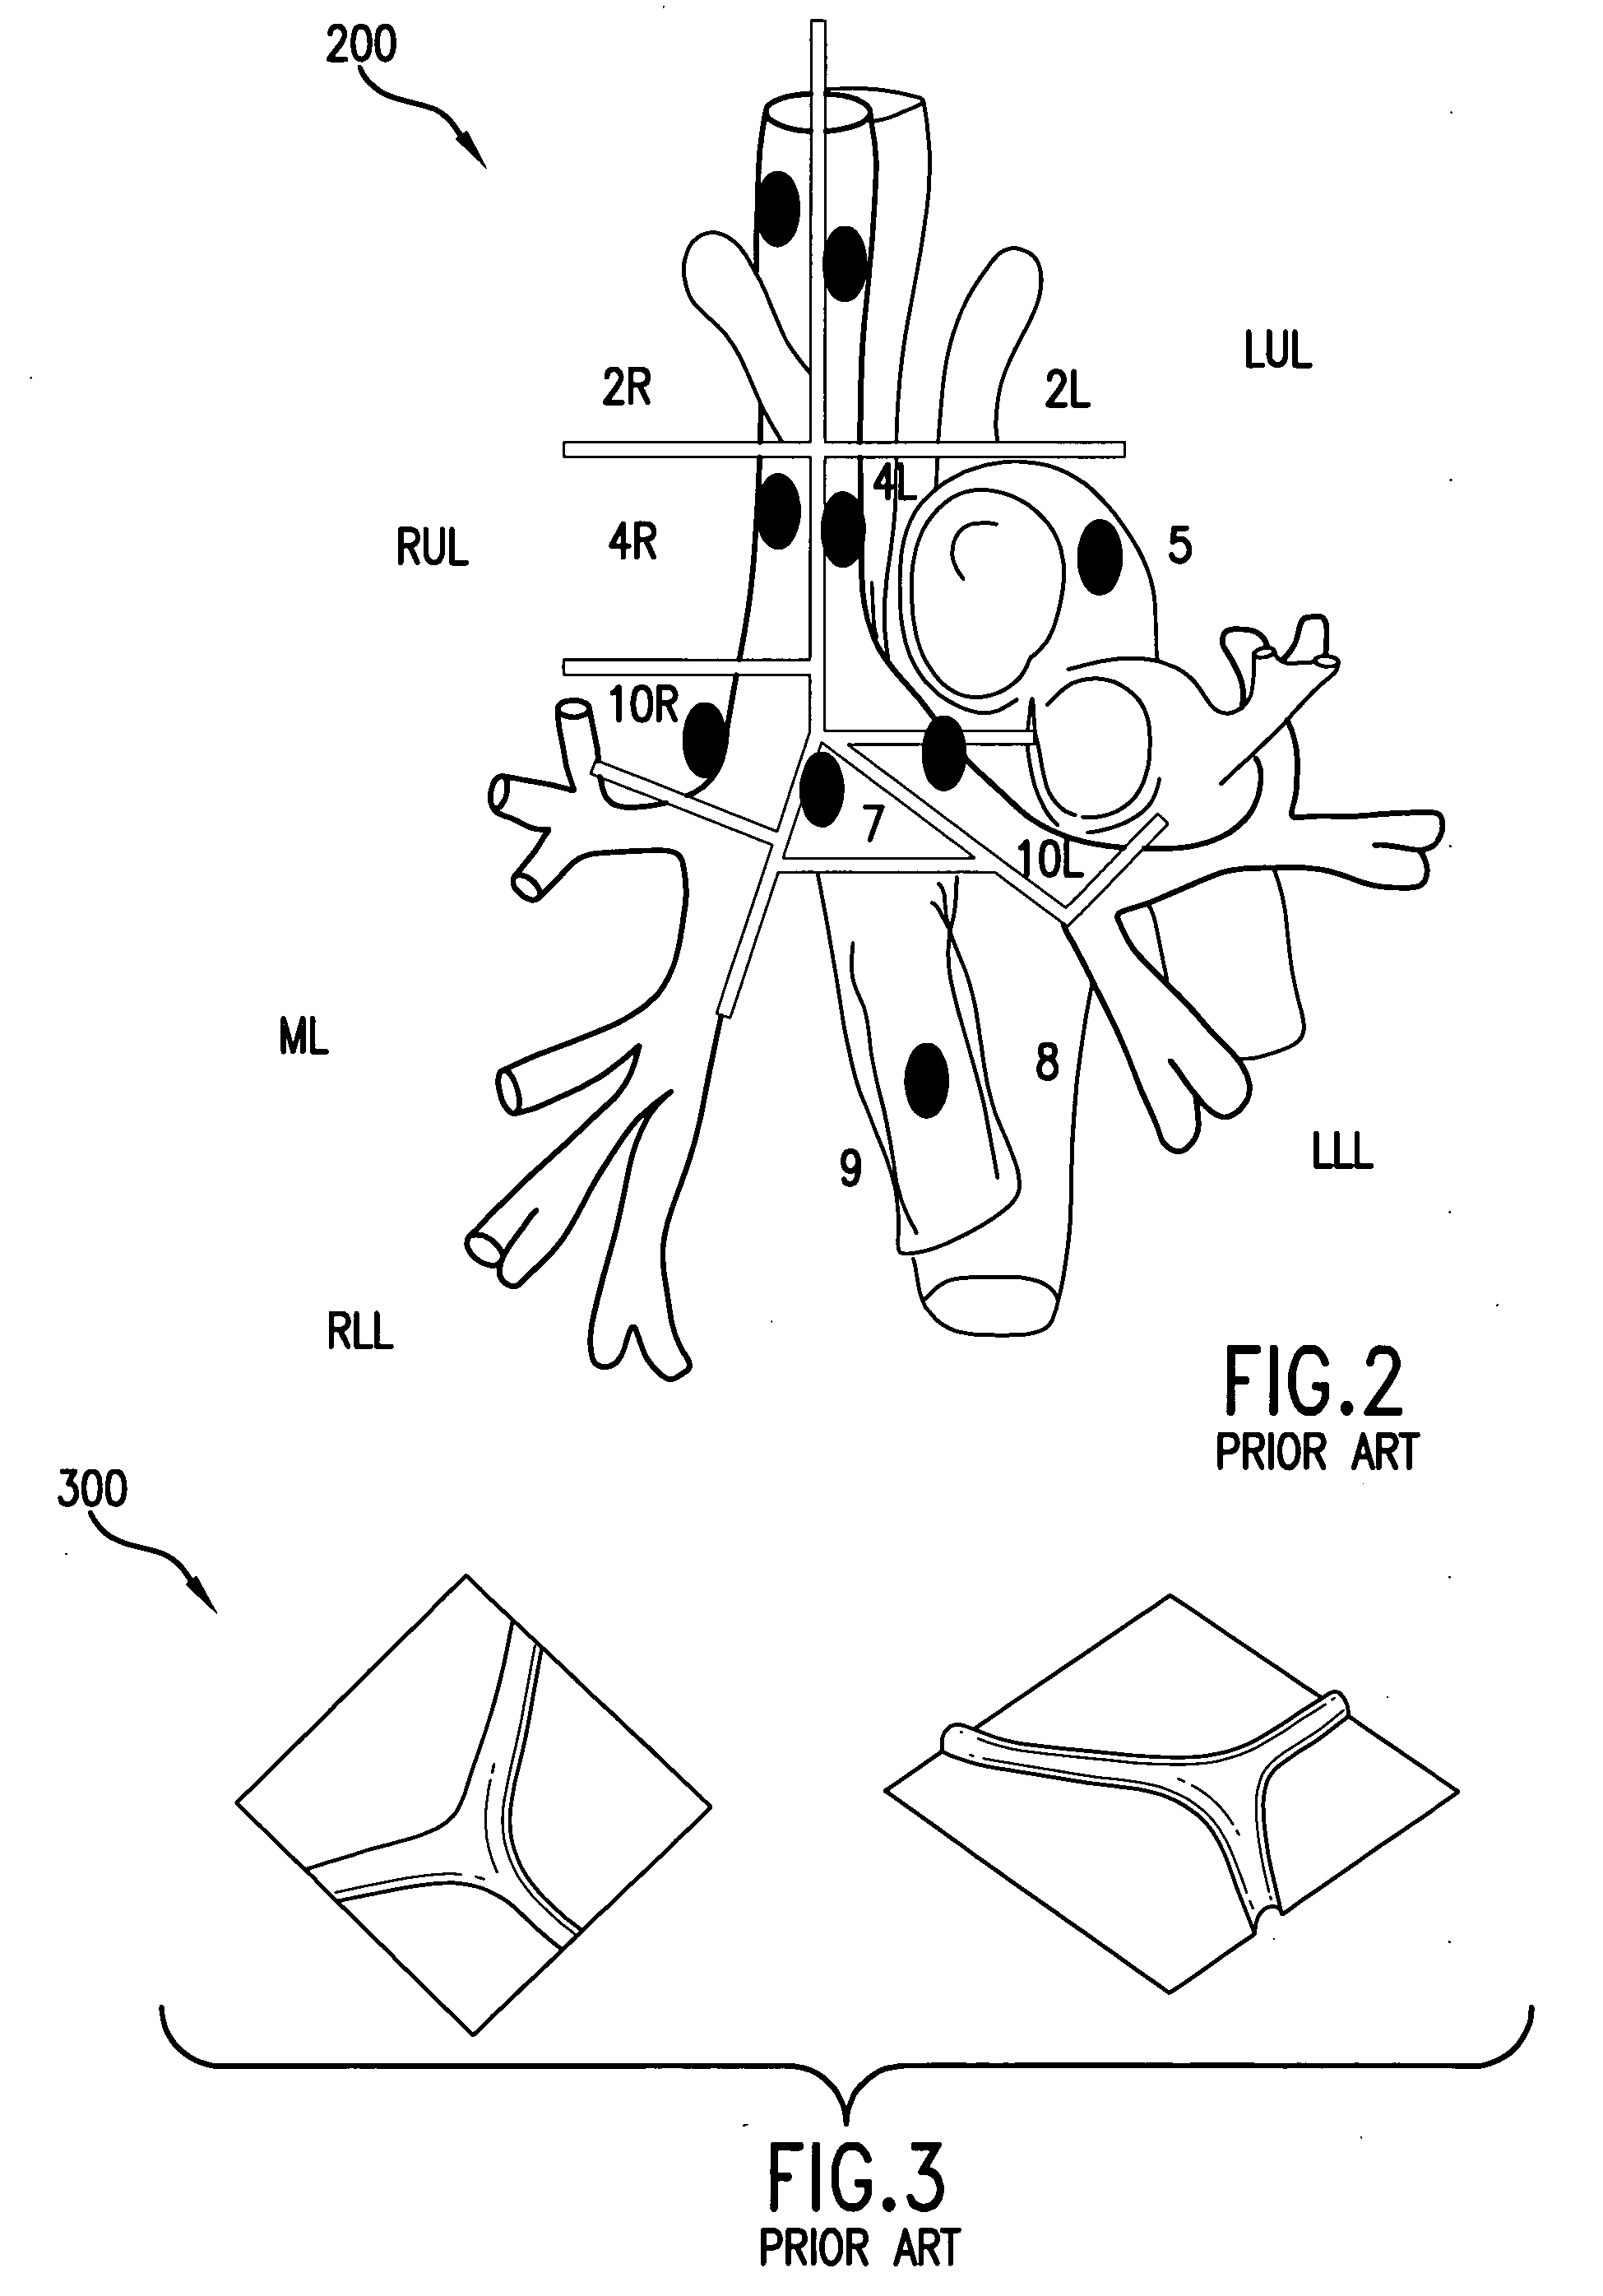 Method and system for prediction and management of material and information transport in an organism